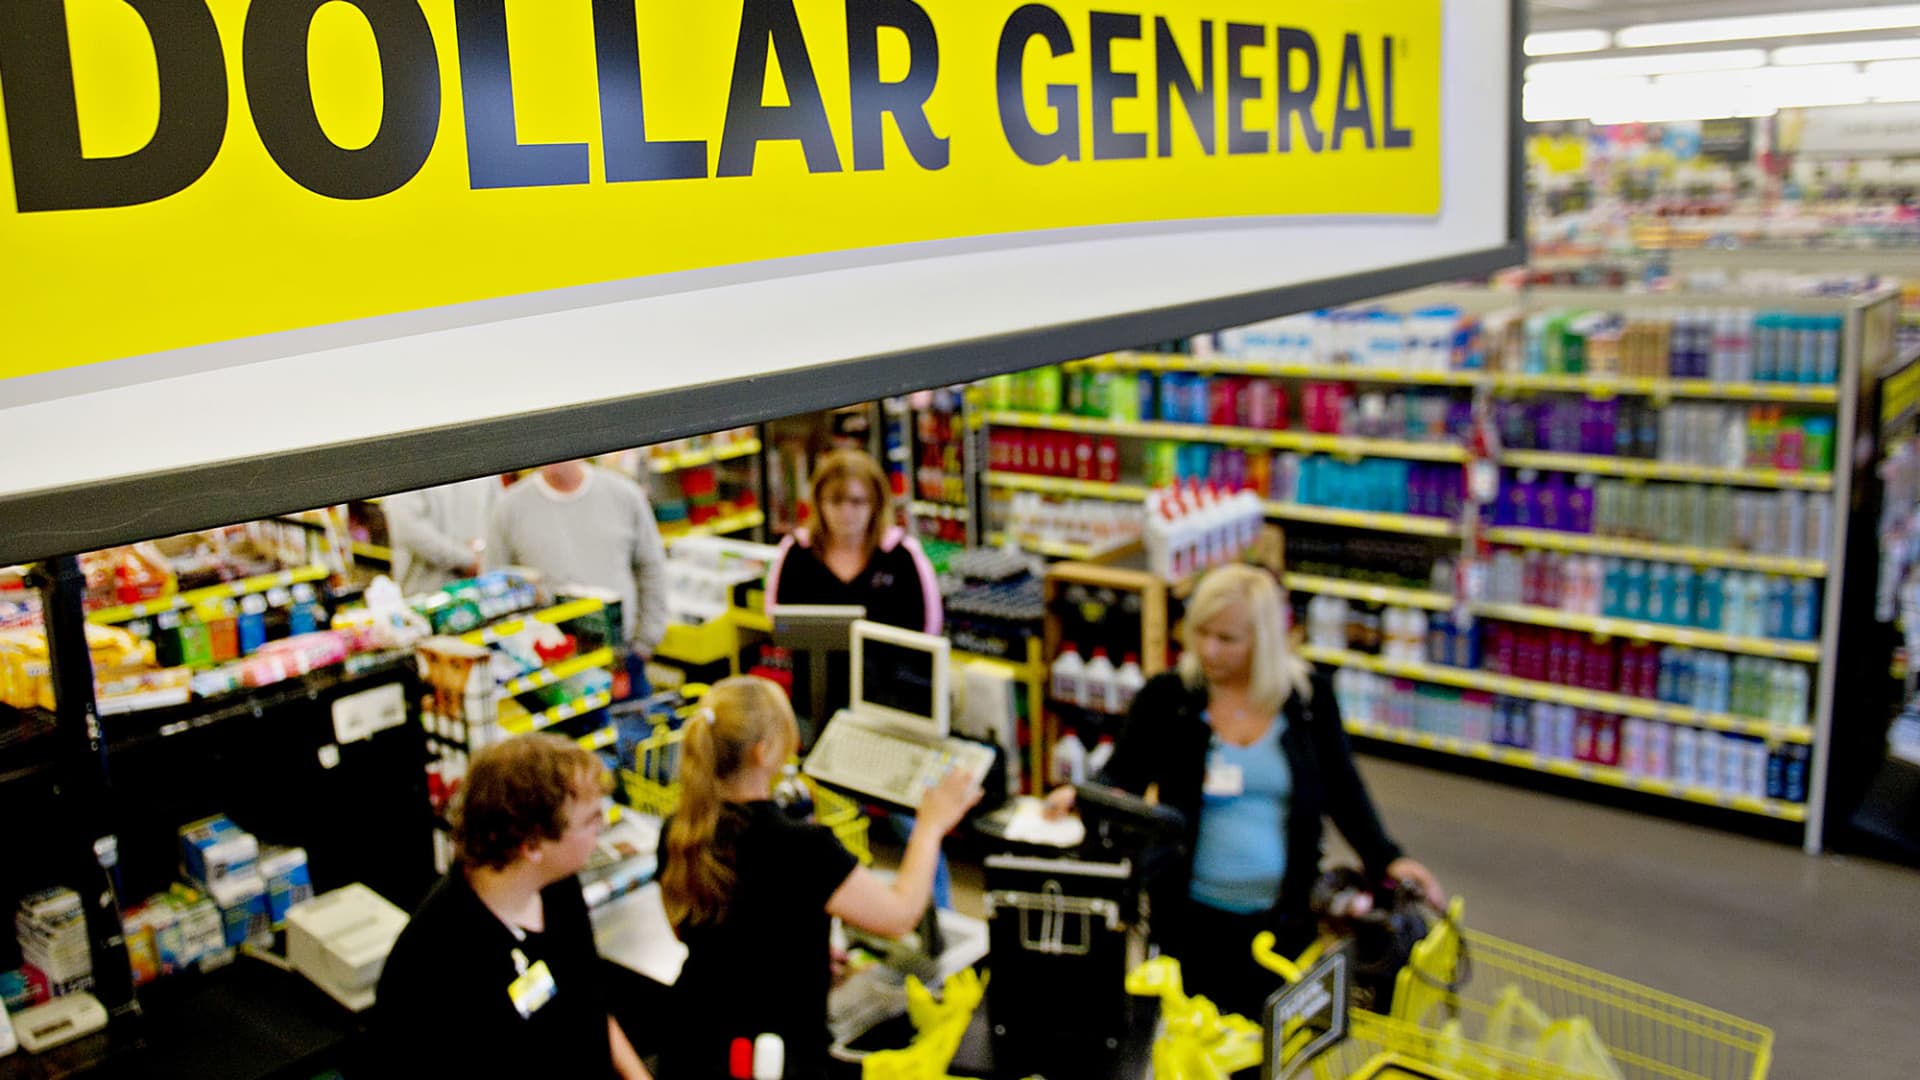 Dollar General fined nearly $1.3 million for worker safety violations